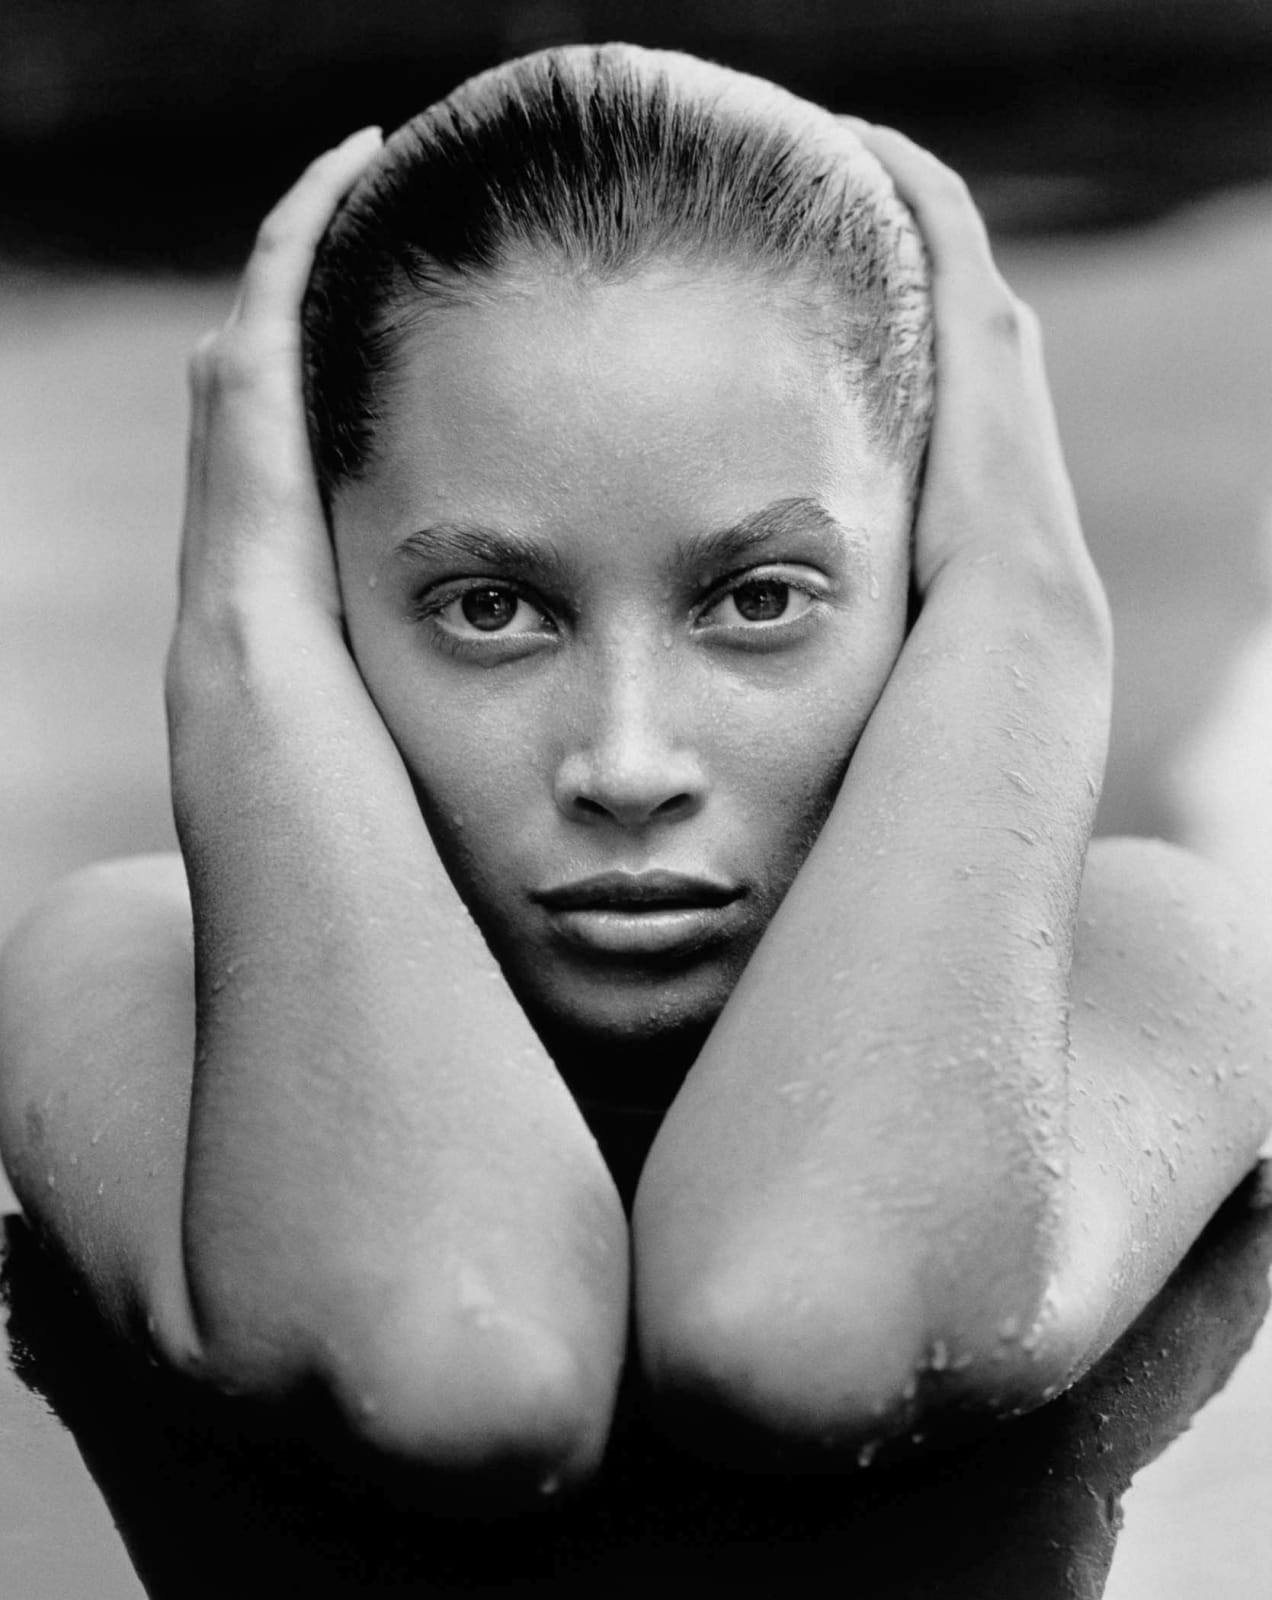 Close-up portrait of Christy Turlington's face and arms in pool by Herb Ritts